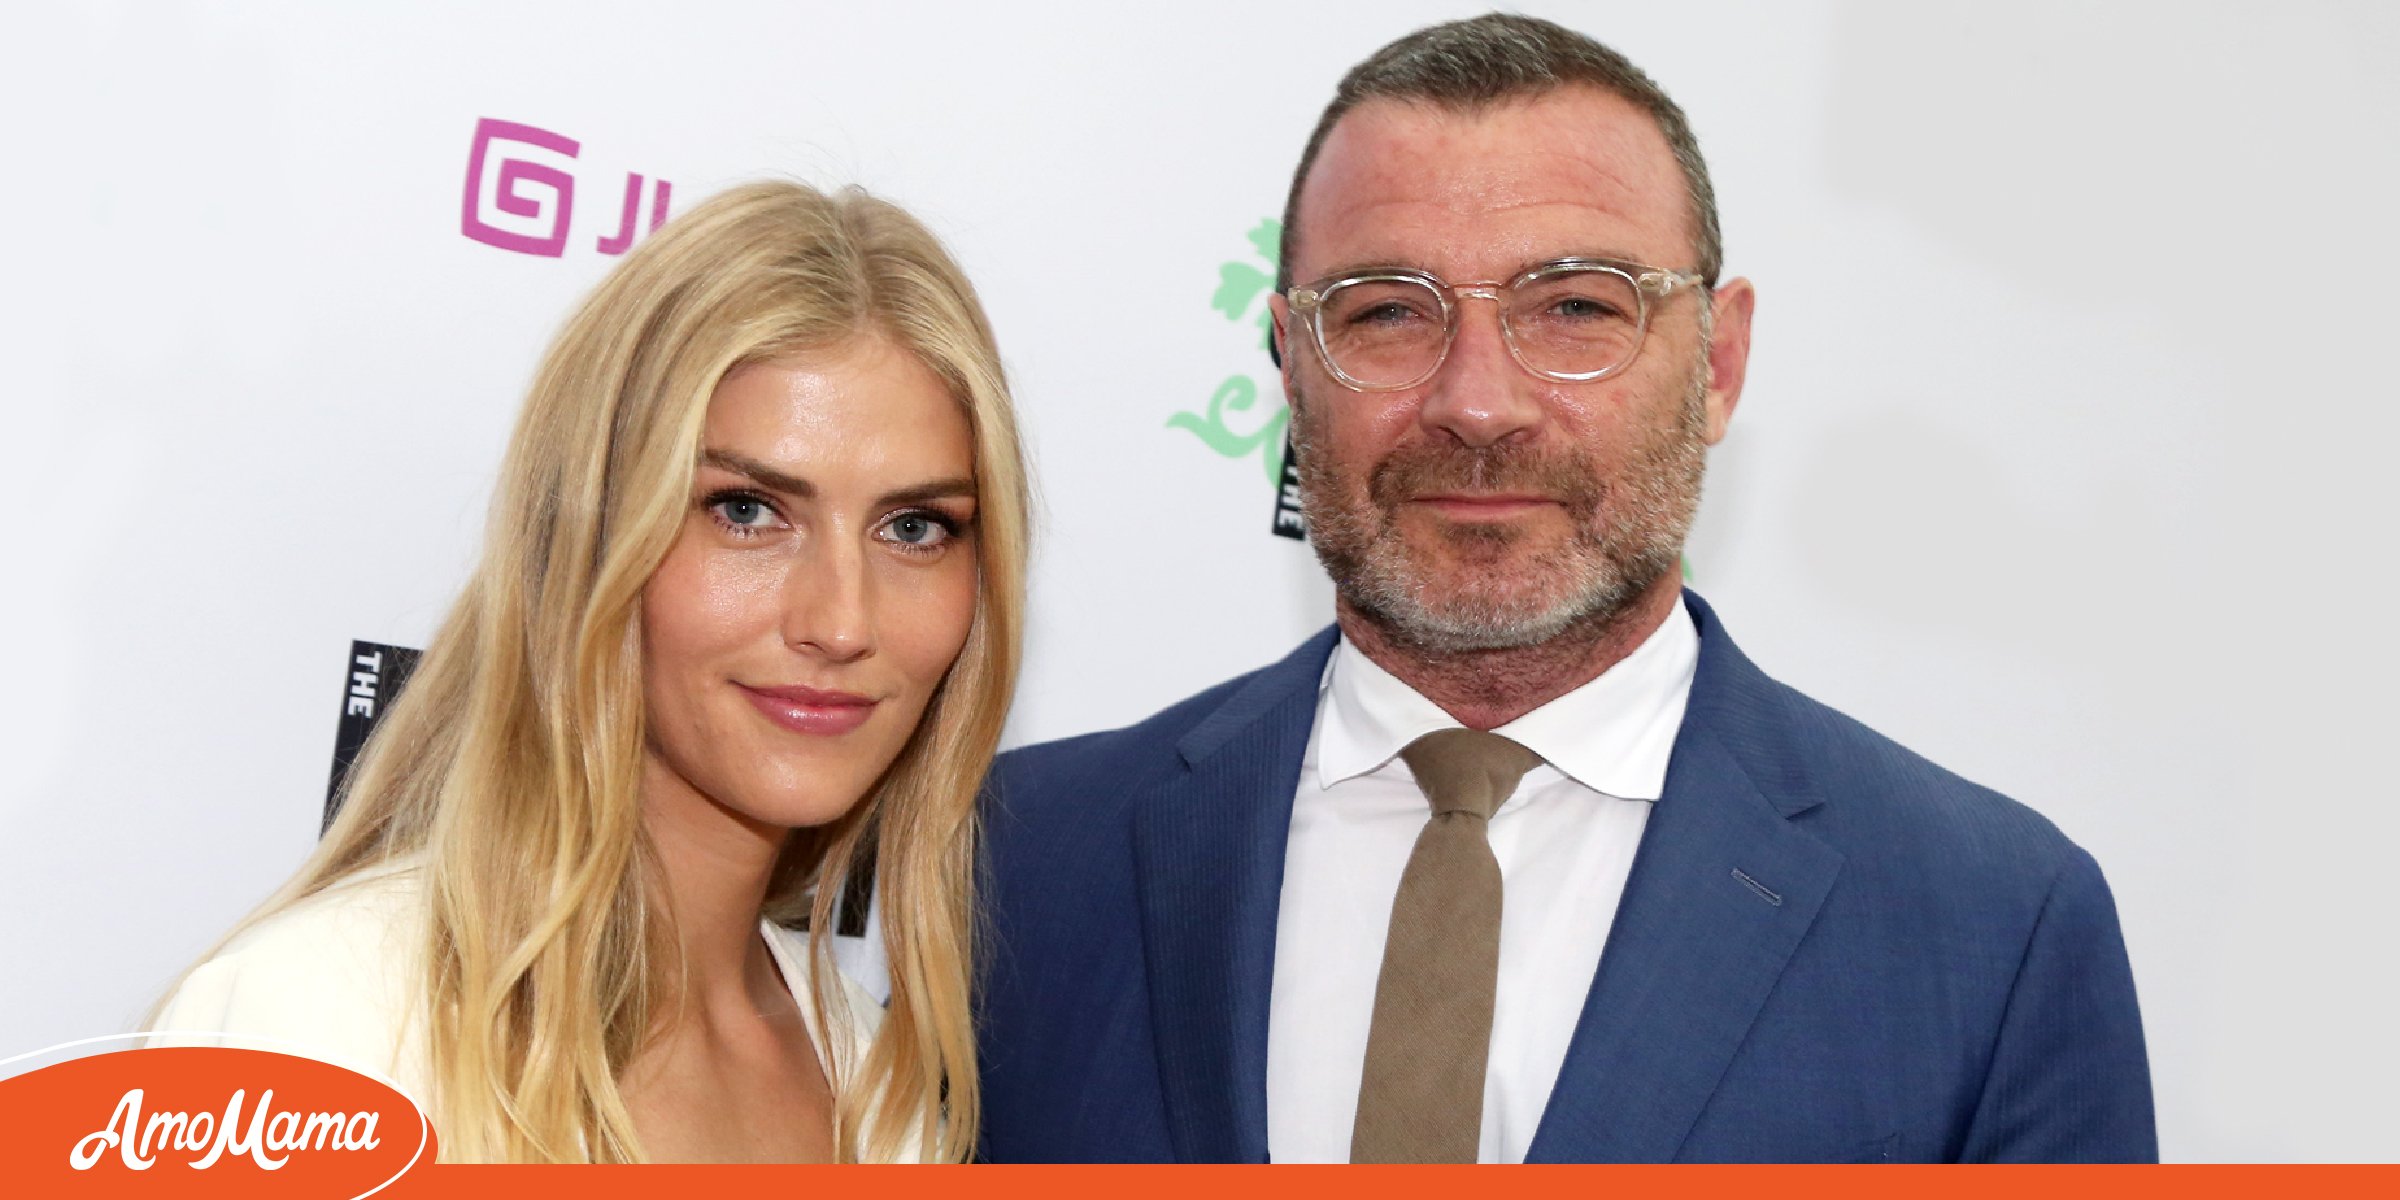 All about Liev Schreiber’s Girlfriend Who Is 25 Years His Junior